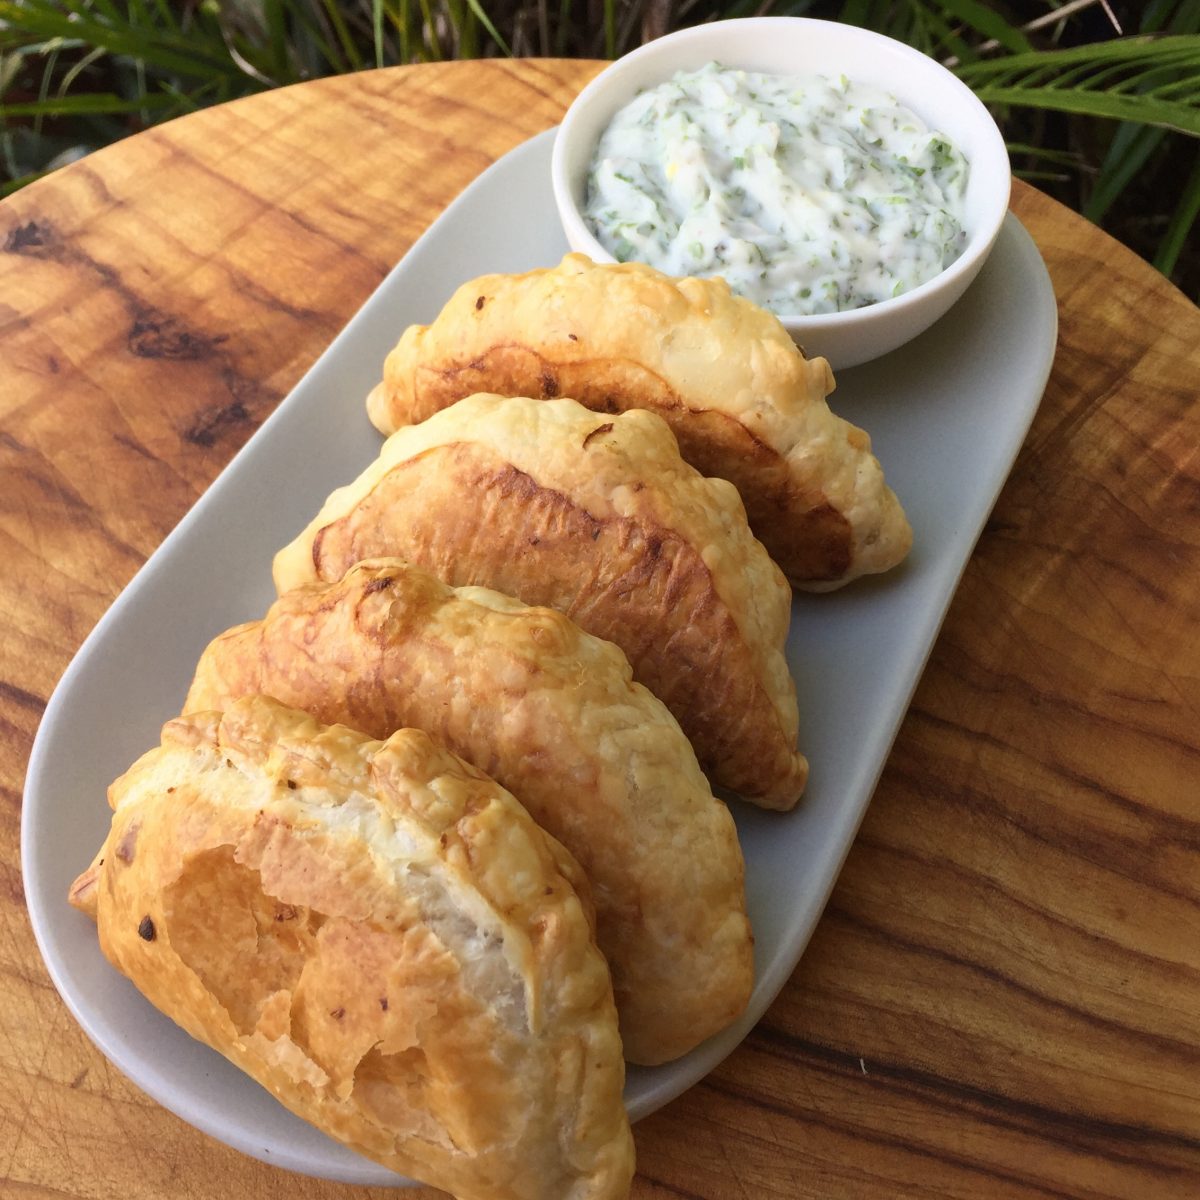 Crunchy pillows of puff pastry filled with Indian curry spiced vegetables served with a bowl of Mint and coriander chutney dipping sauce